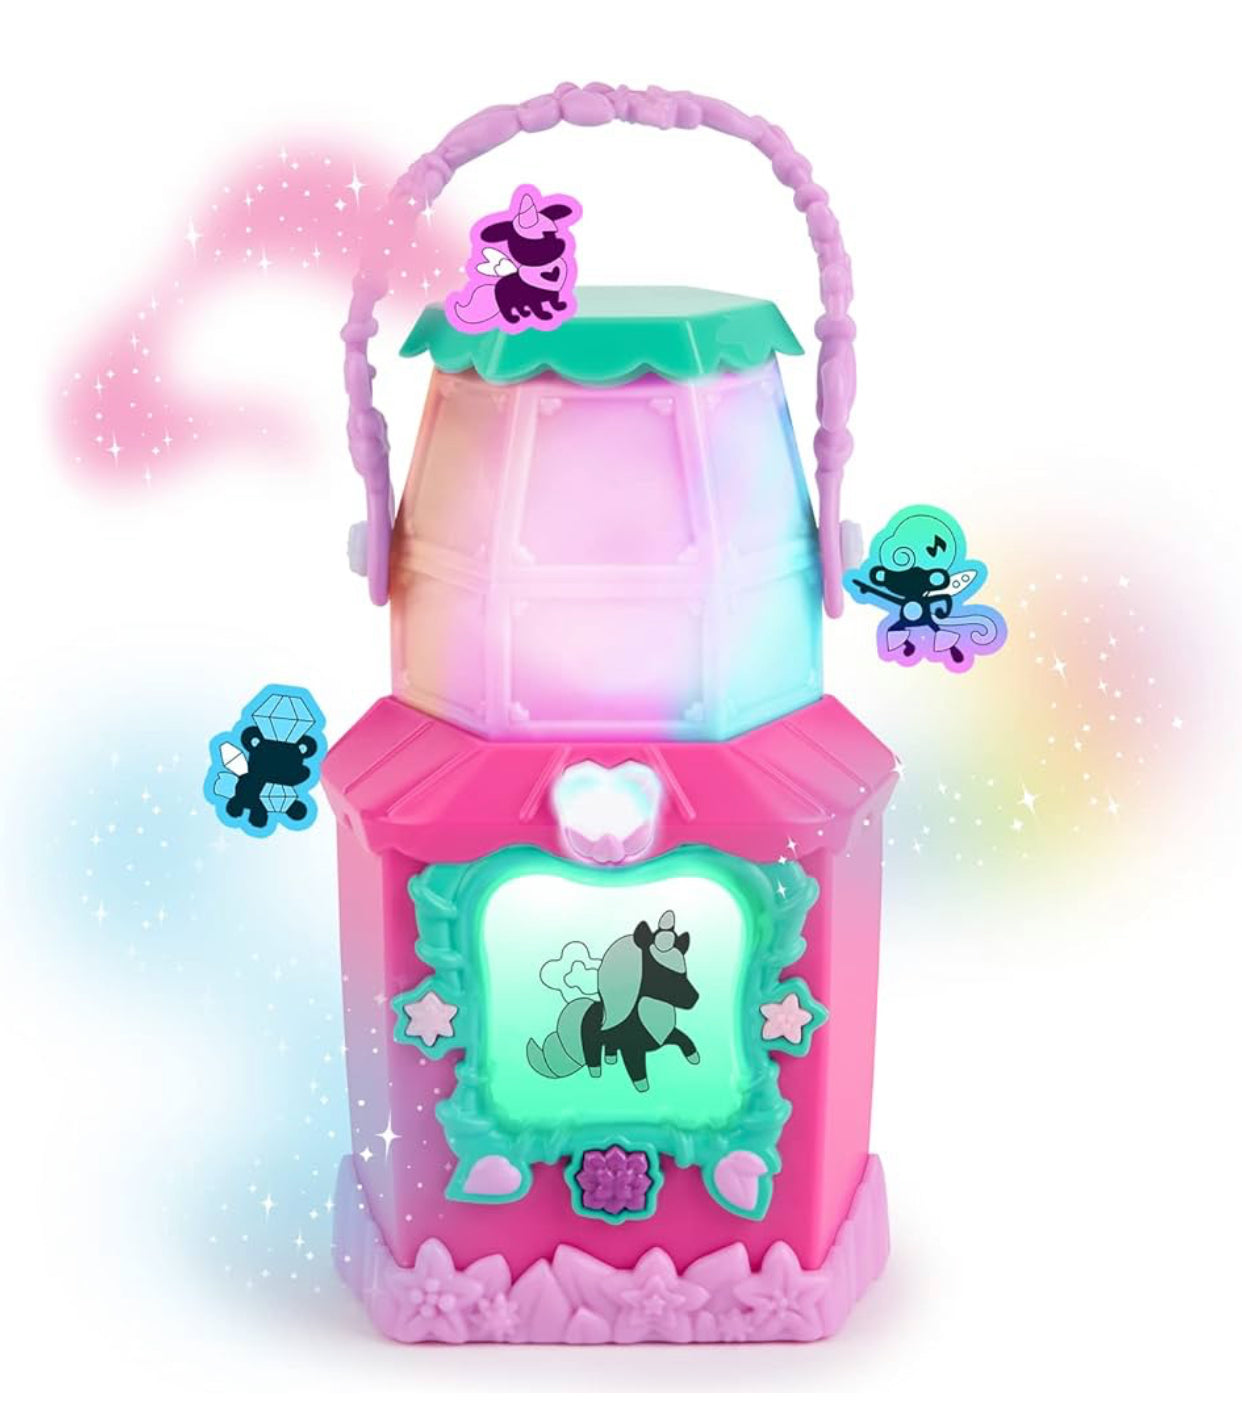 Casepack of 2 Got2Glow Fairy Pet Finder – Magic Fairy Jar Toy Includes 40+ Virtual Pets (Pink)